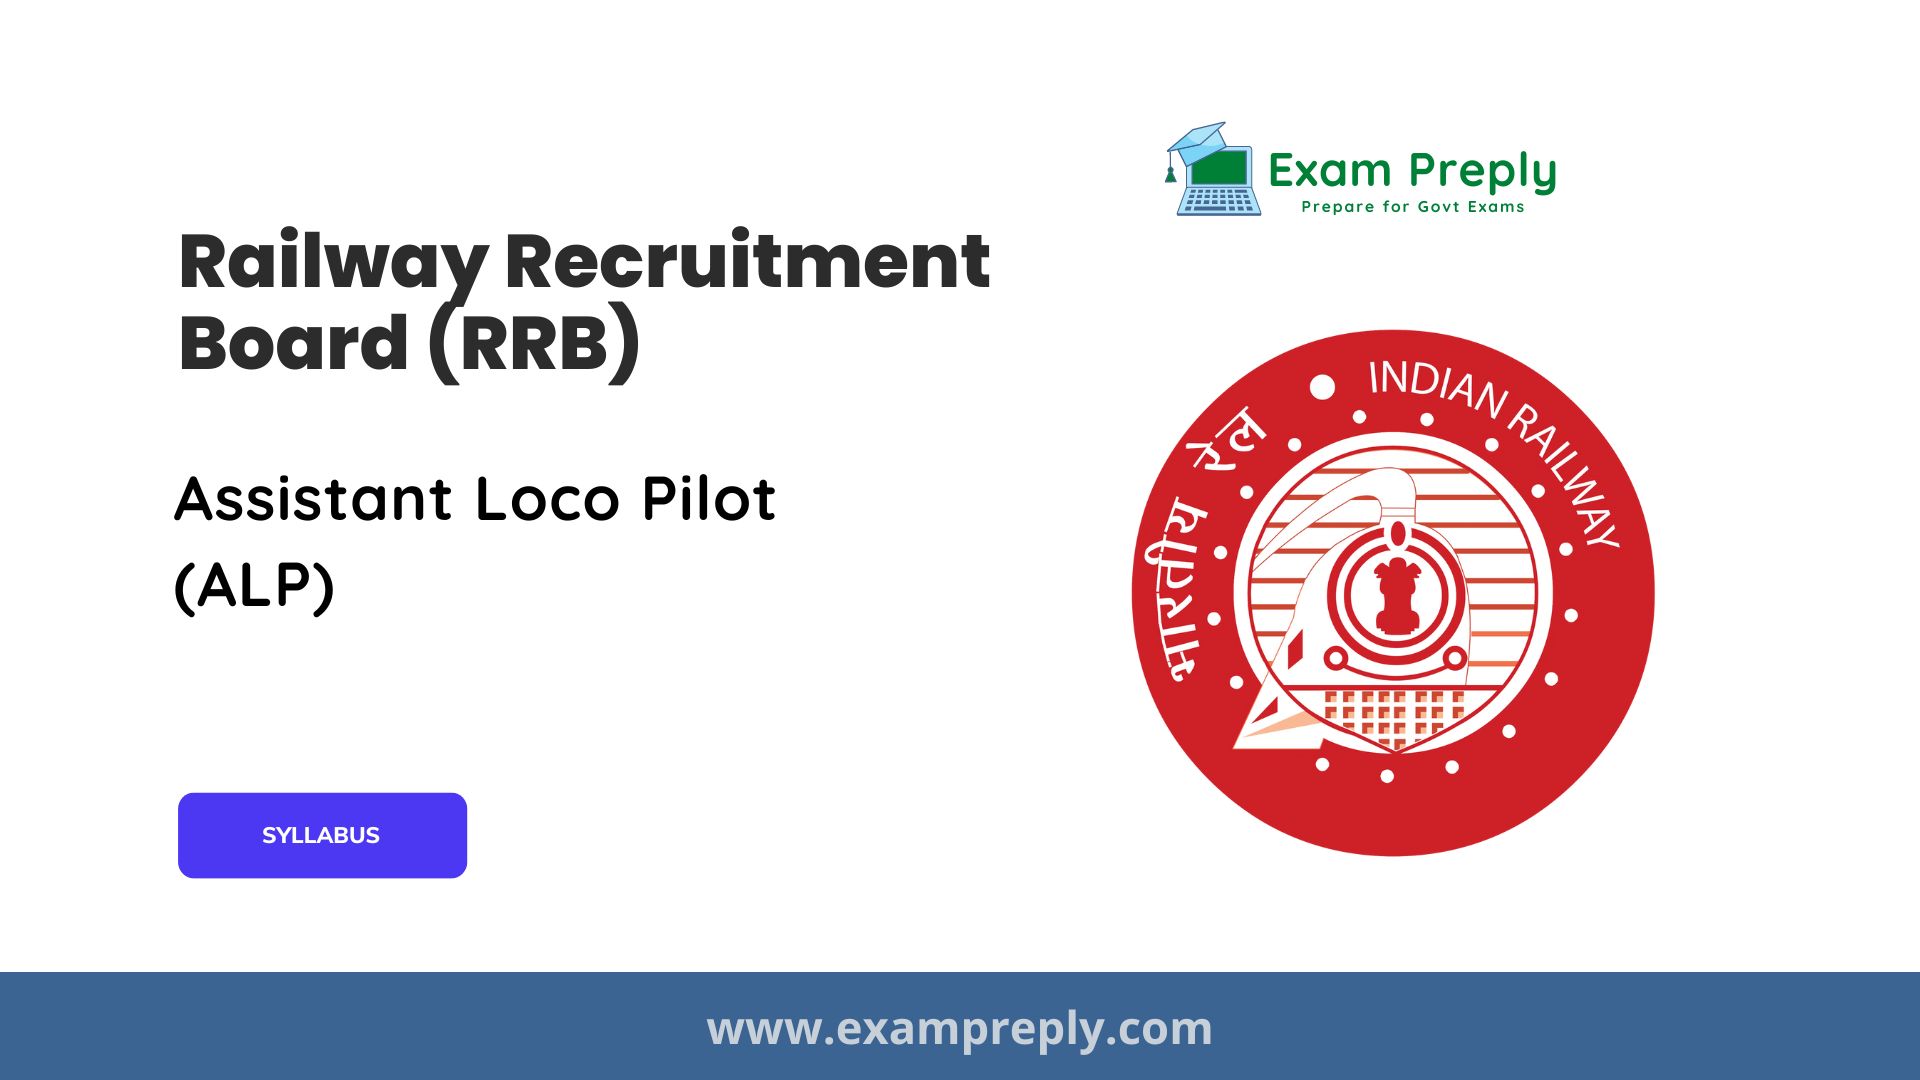 rrb-assistant-loco-pilot-alp-syllabus-and-exam-pattern-exam-preply